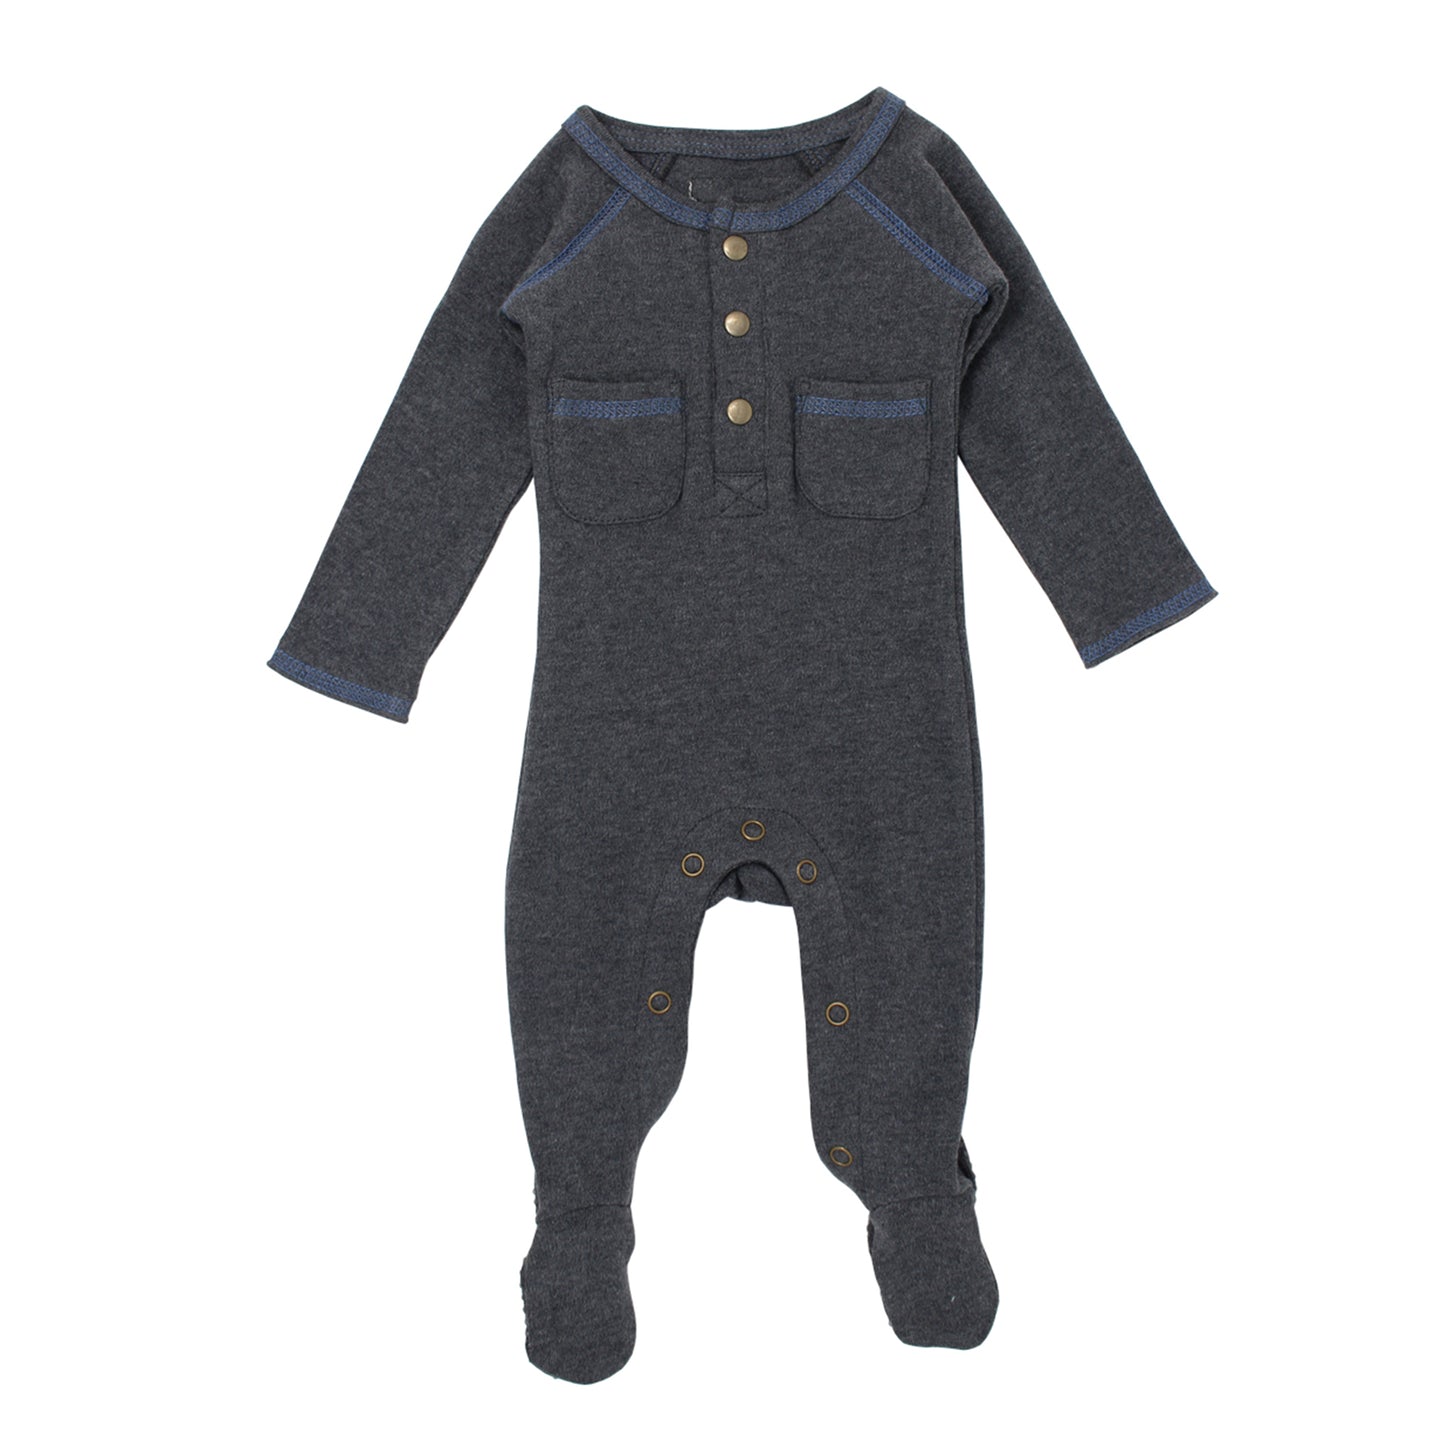 L'Oved Baby OR474 Organic Pocket Footie